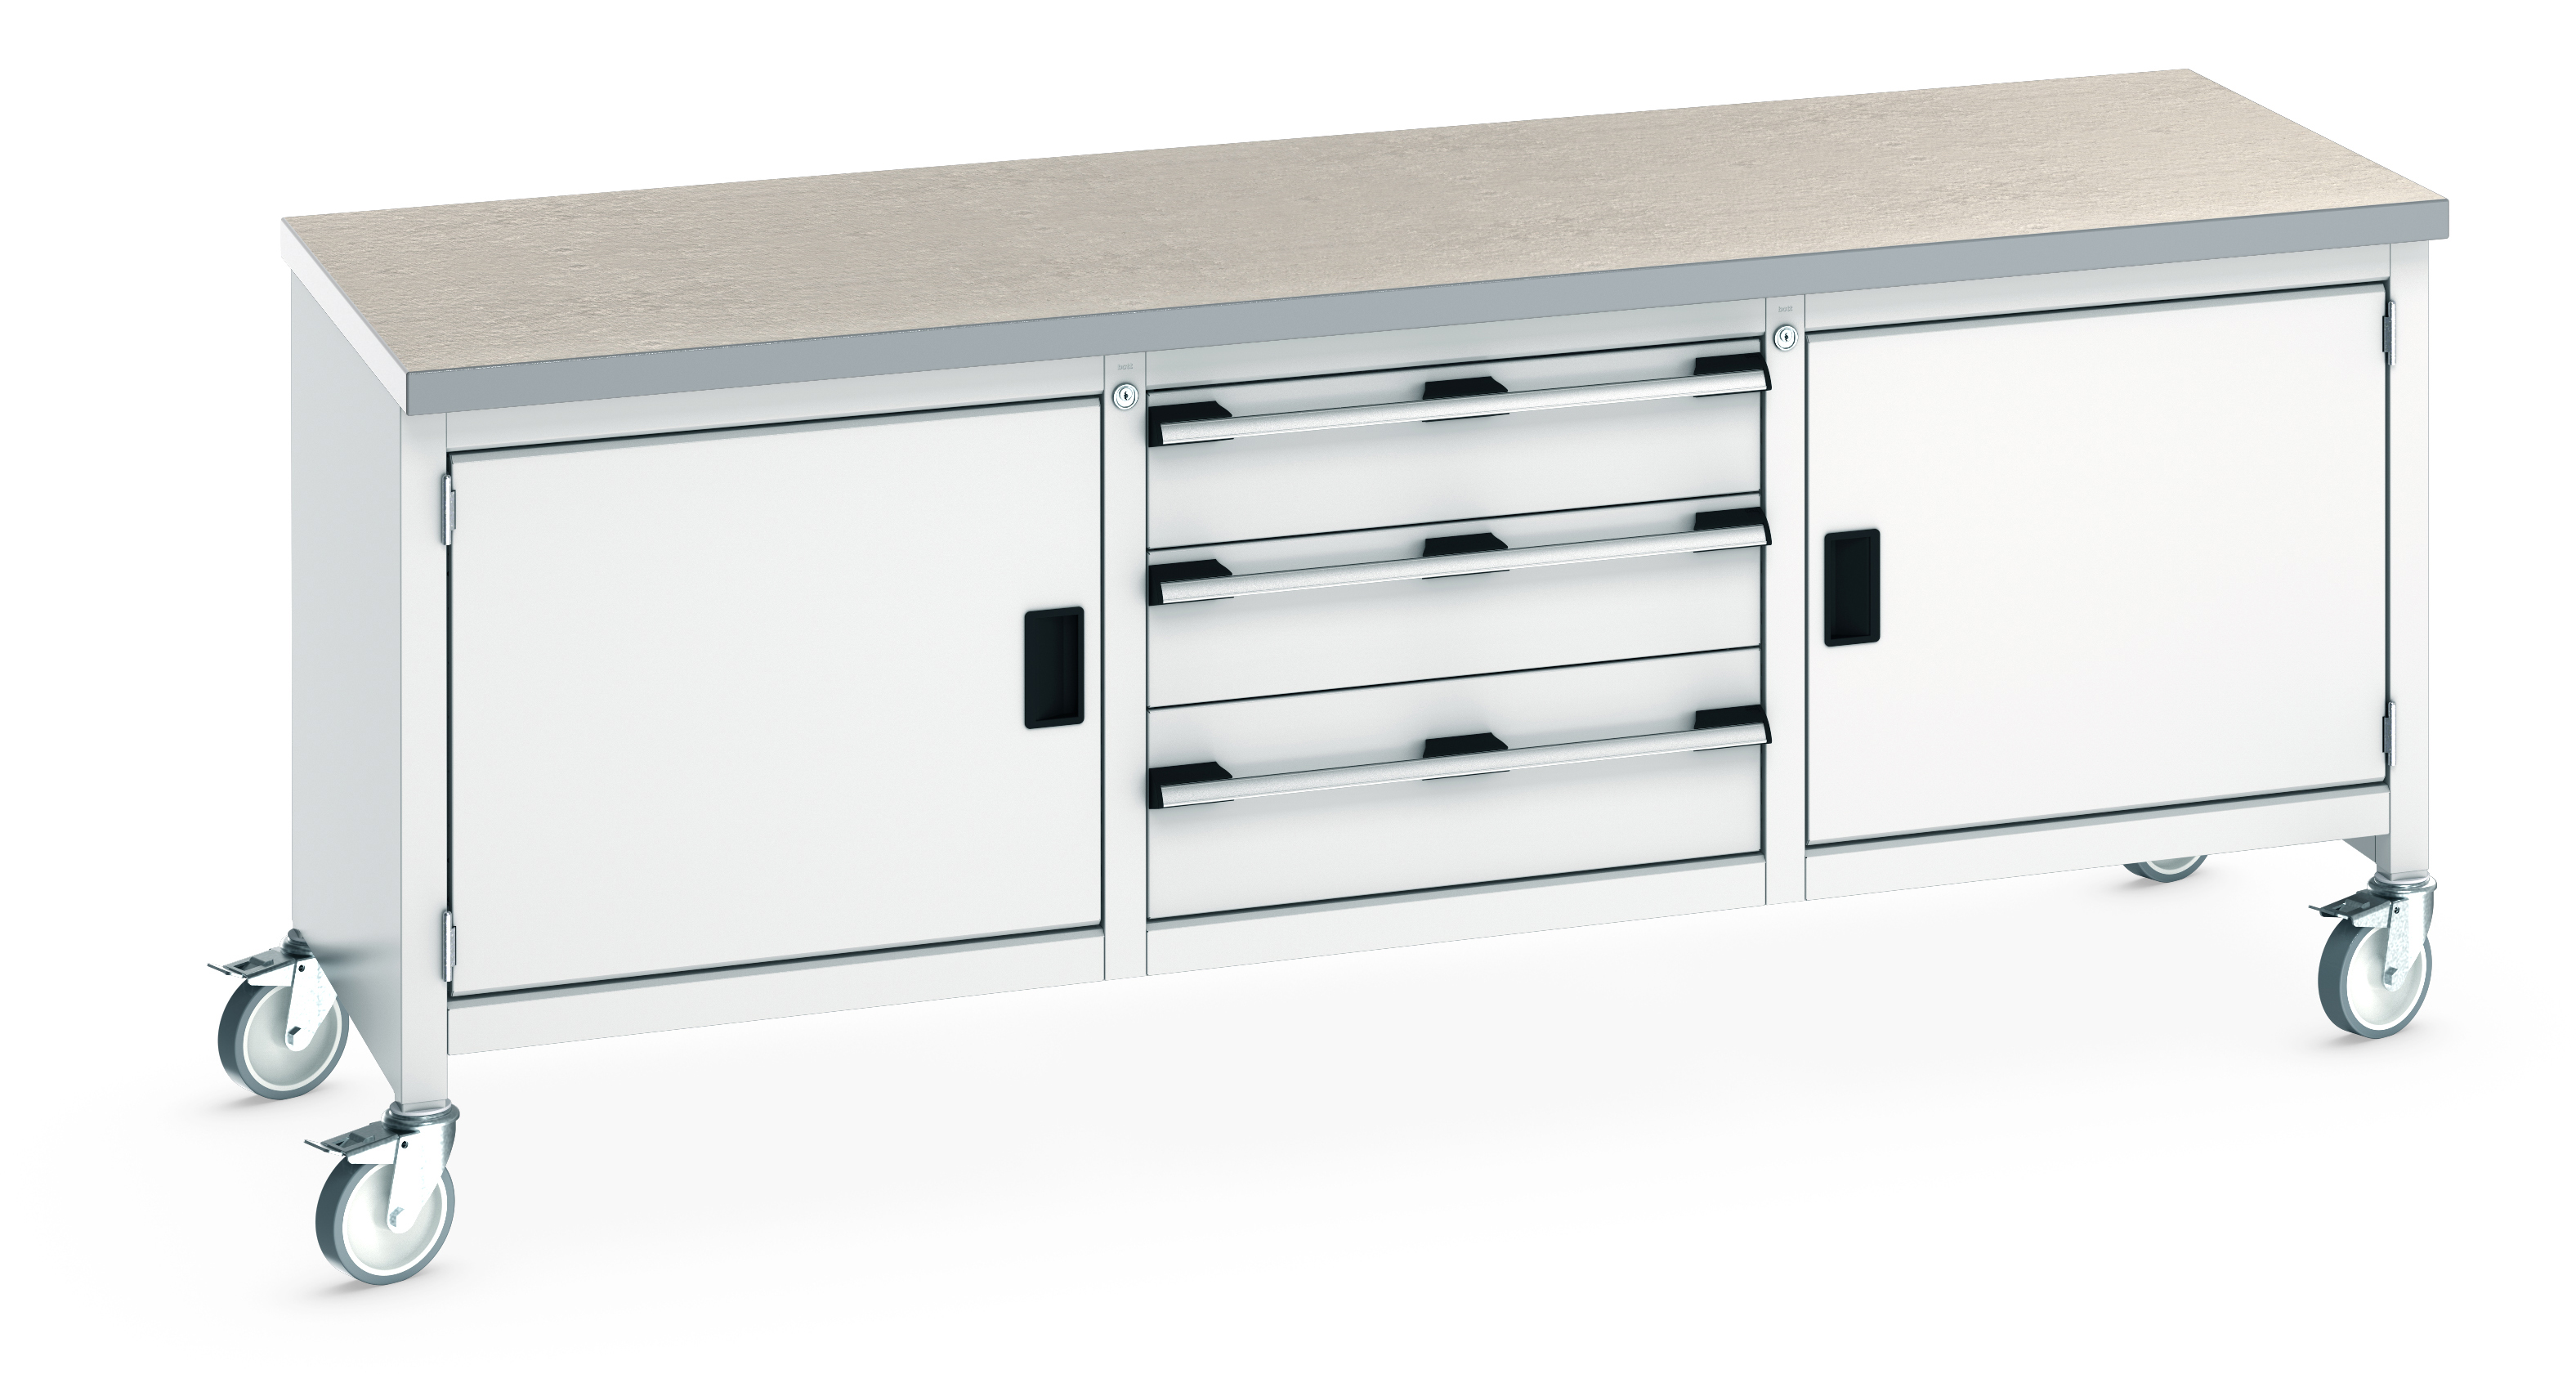 Bott Cubio Mobile Storage Bench With Full Cupboard / 3 Drawer Cabinet / Full Cupboard - 41002126.16V